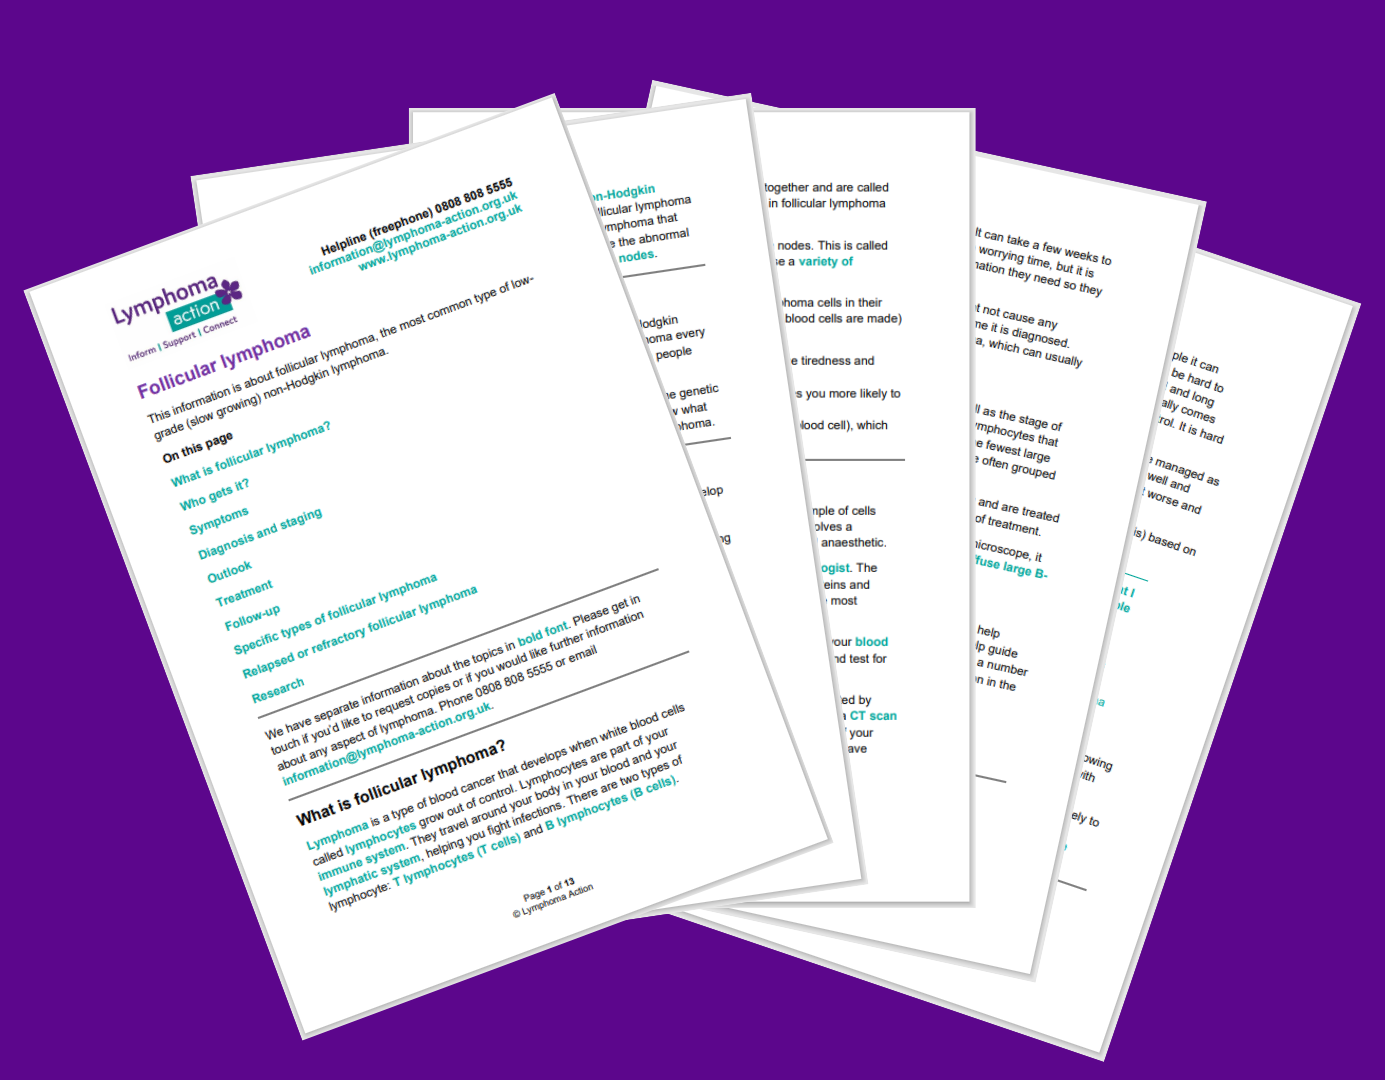 Purple background with images of the follicular lymphoma information sheet pages